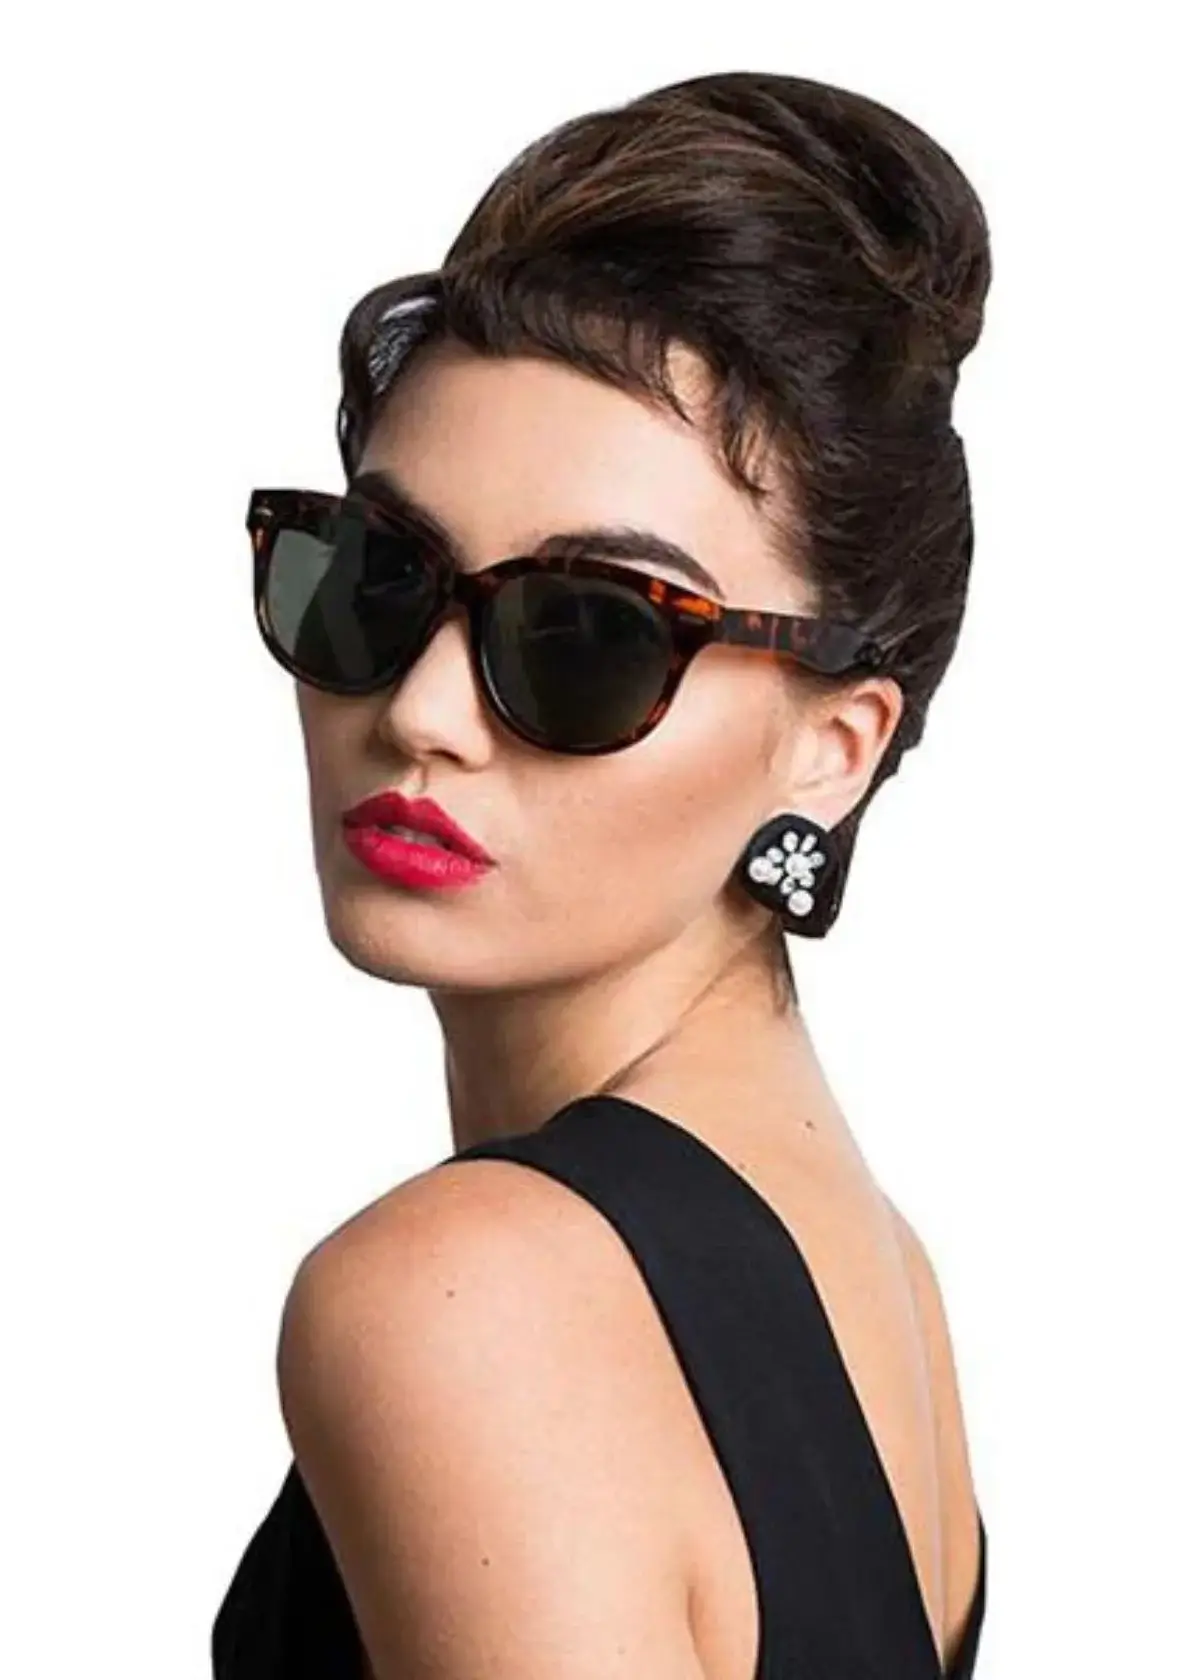 What other accessories did Audrey Hepburn often pair with her sunglasses?